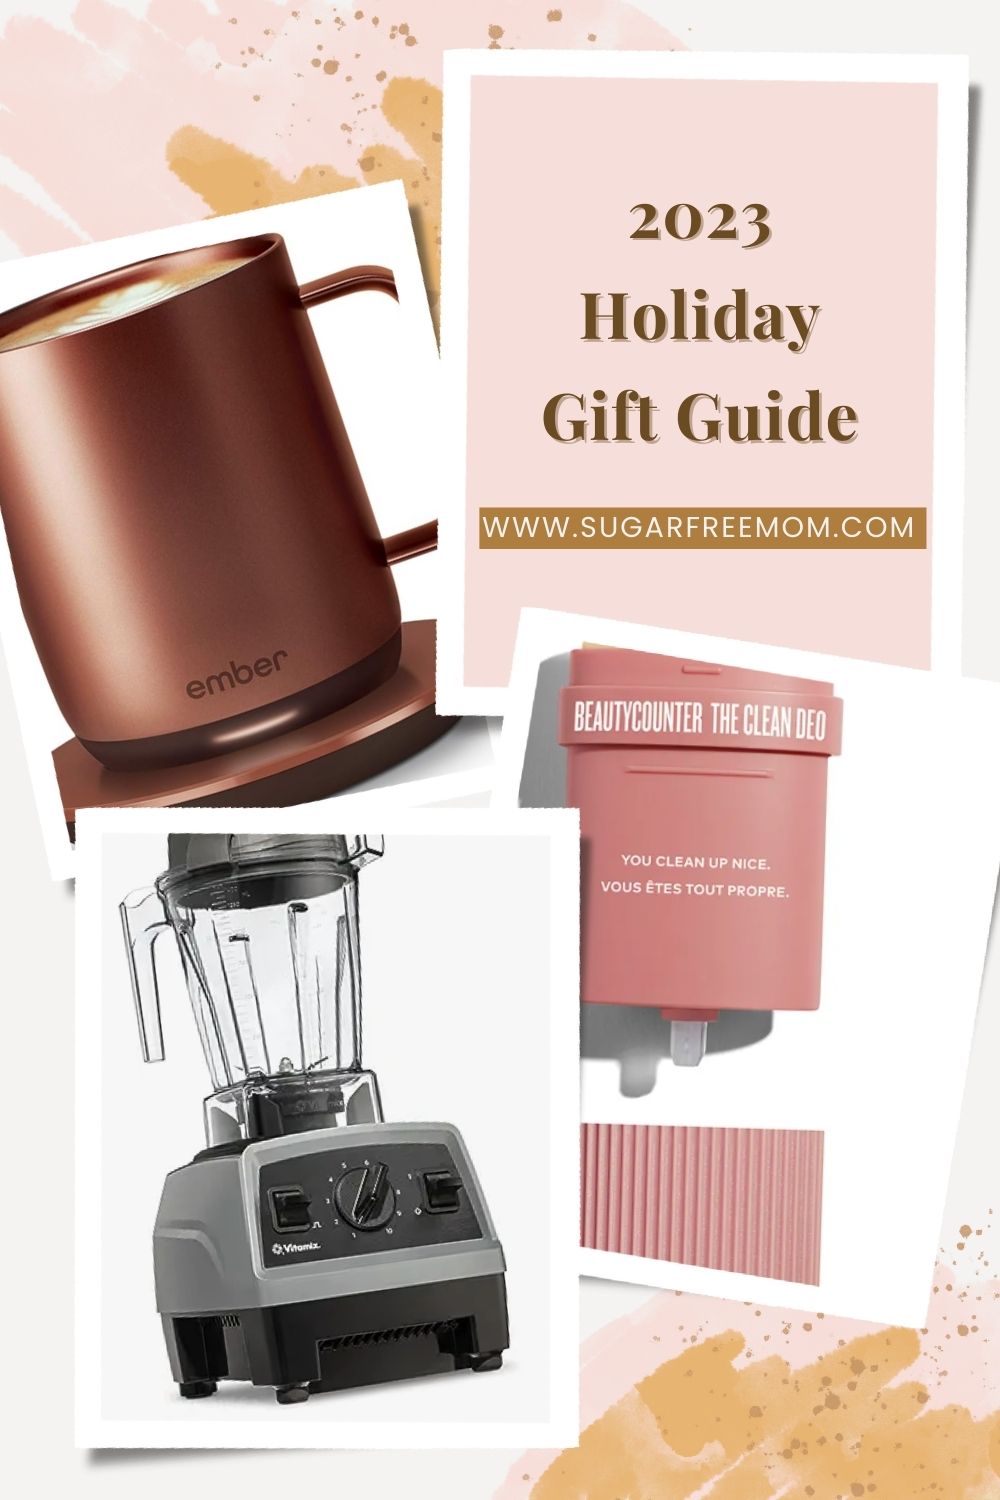 Here's our 2023 Holiday Gift Guide for the best gifts for those low carb as well as thoughtful gifts for everyone on this year's list for your holiday season! 